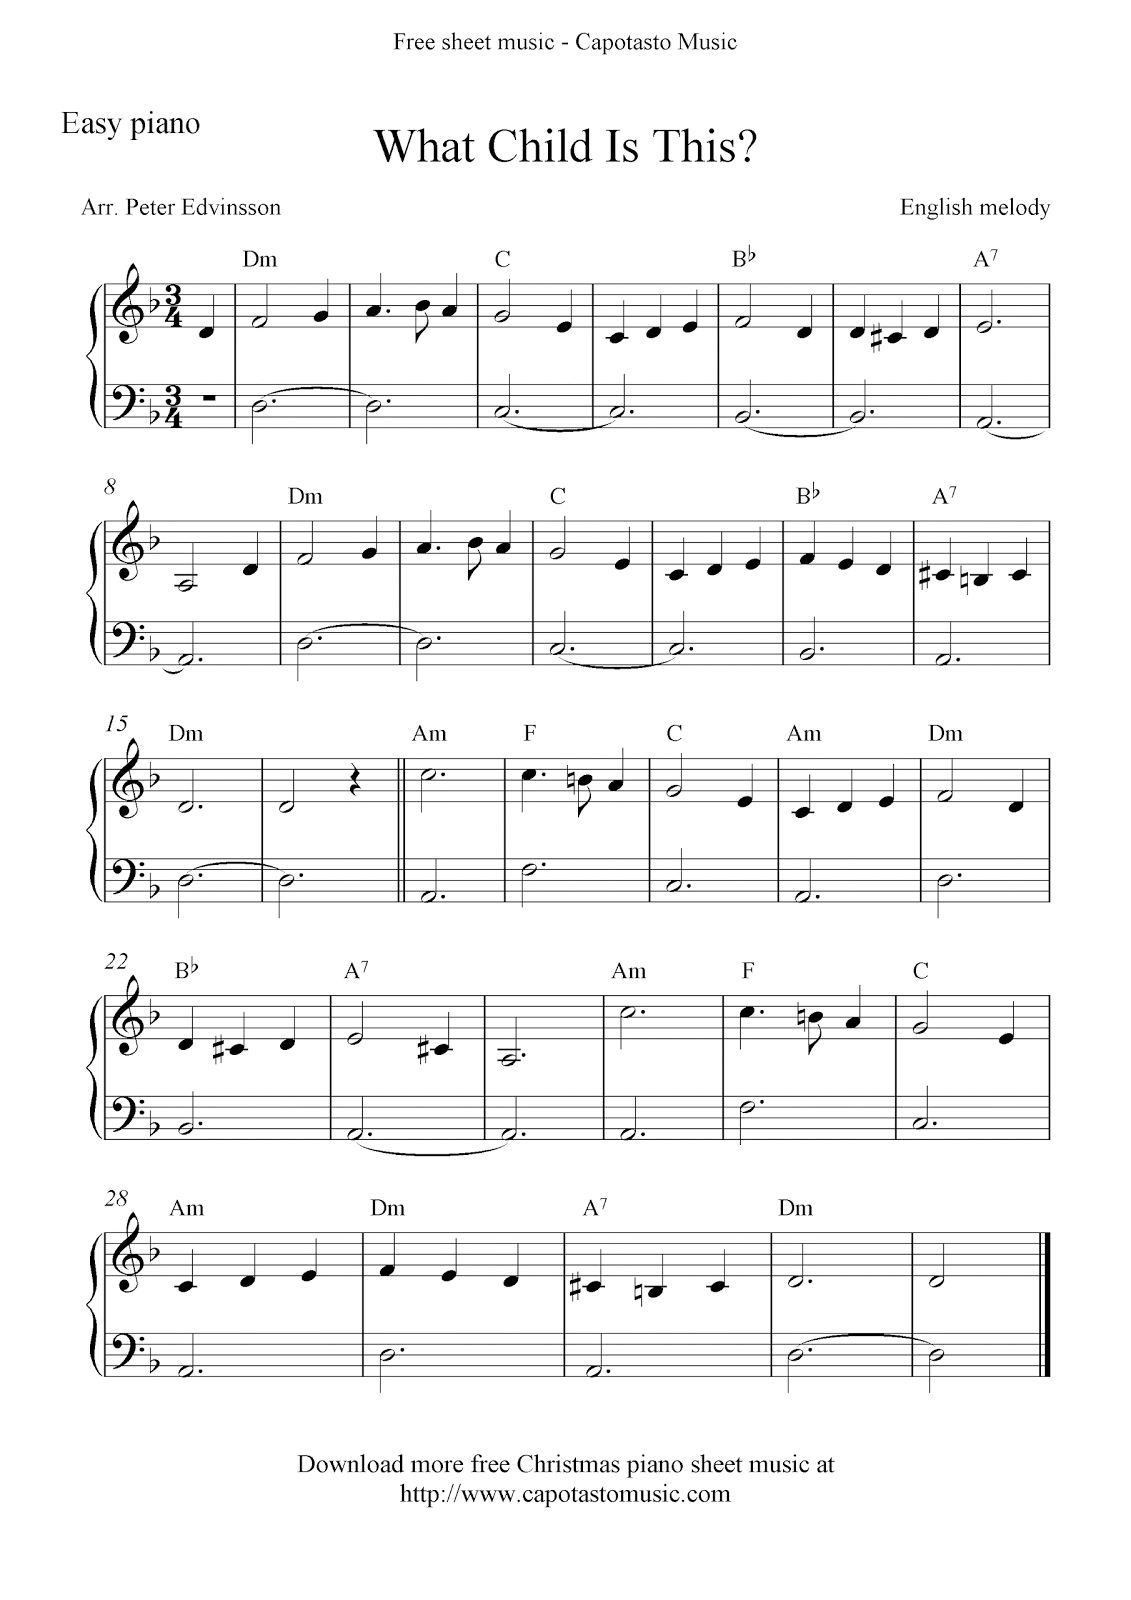 Easy Piano Solo Arrangementpeter Edvinsson Of The Christmas - Christmas Music For Piano Free Printable